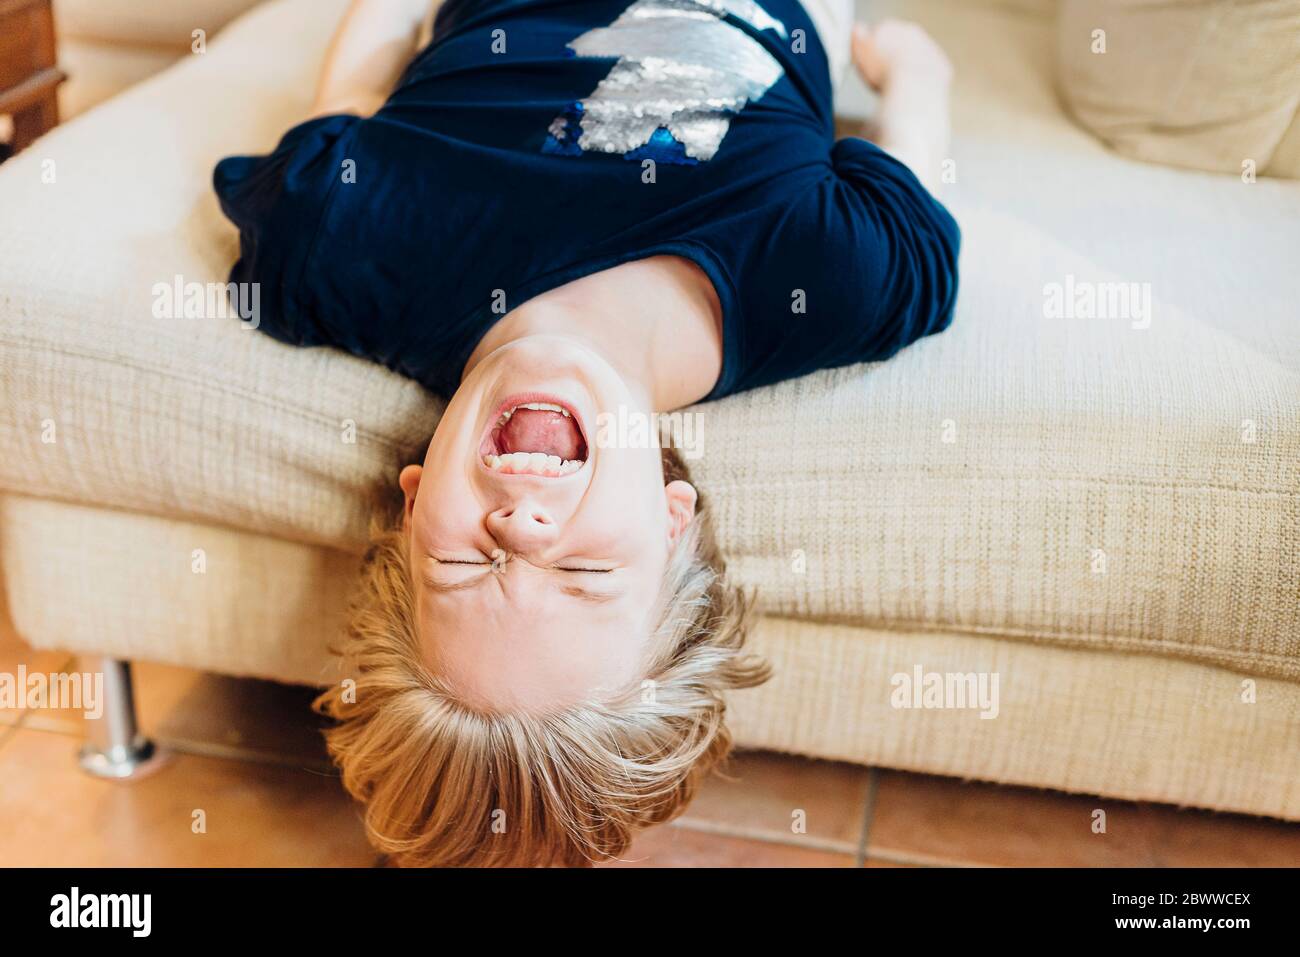 Screaming boy lying on couch Stock Photo